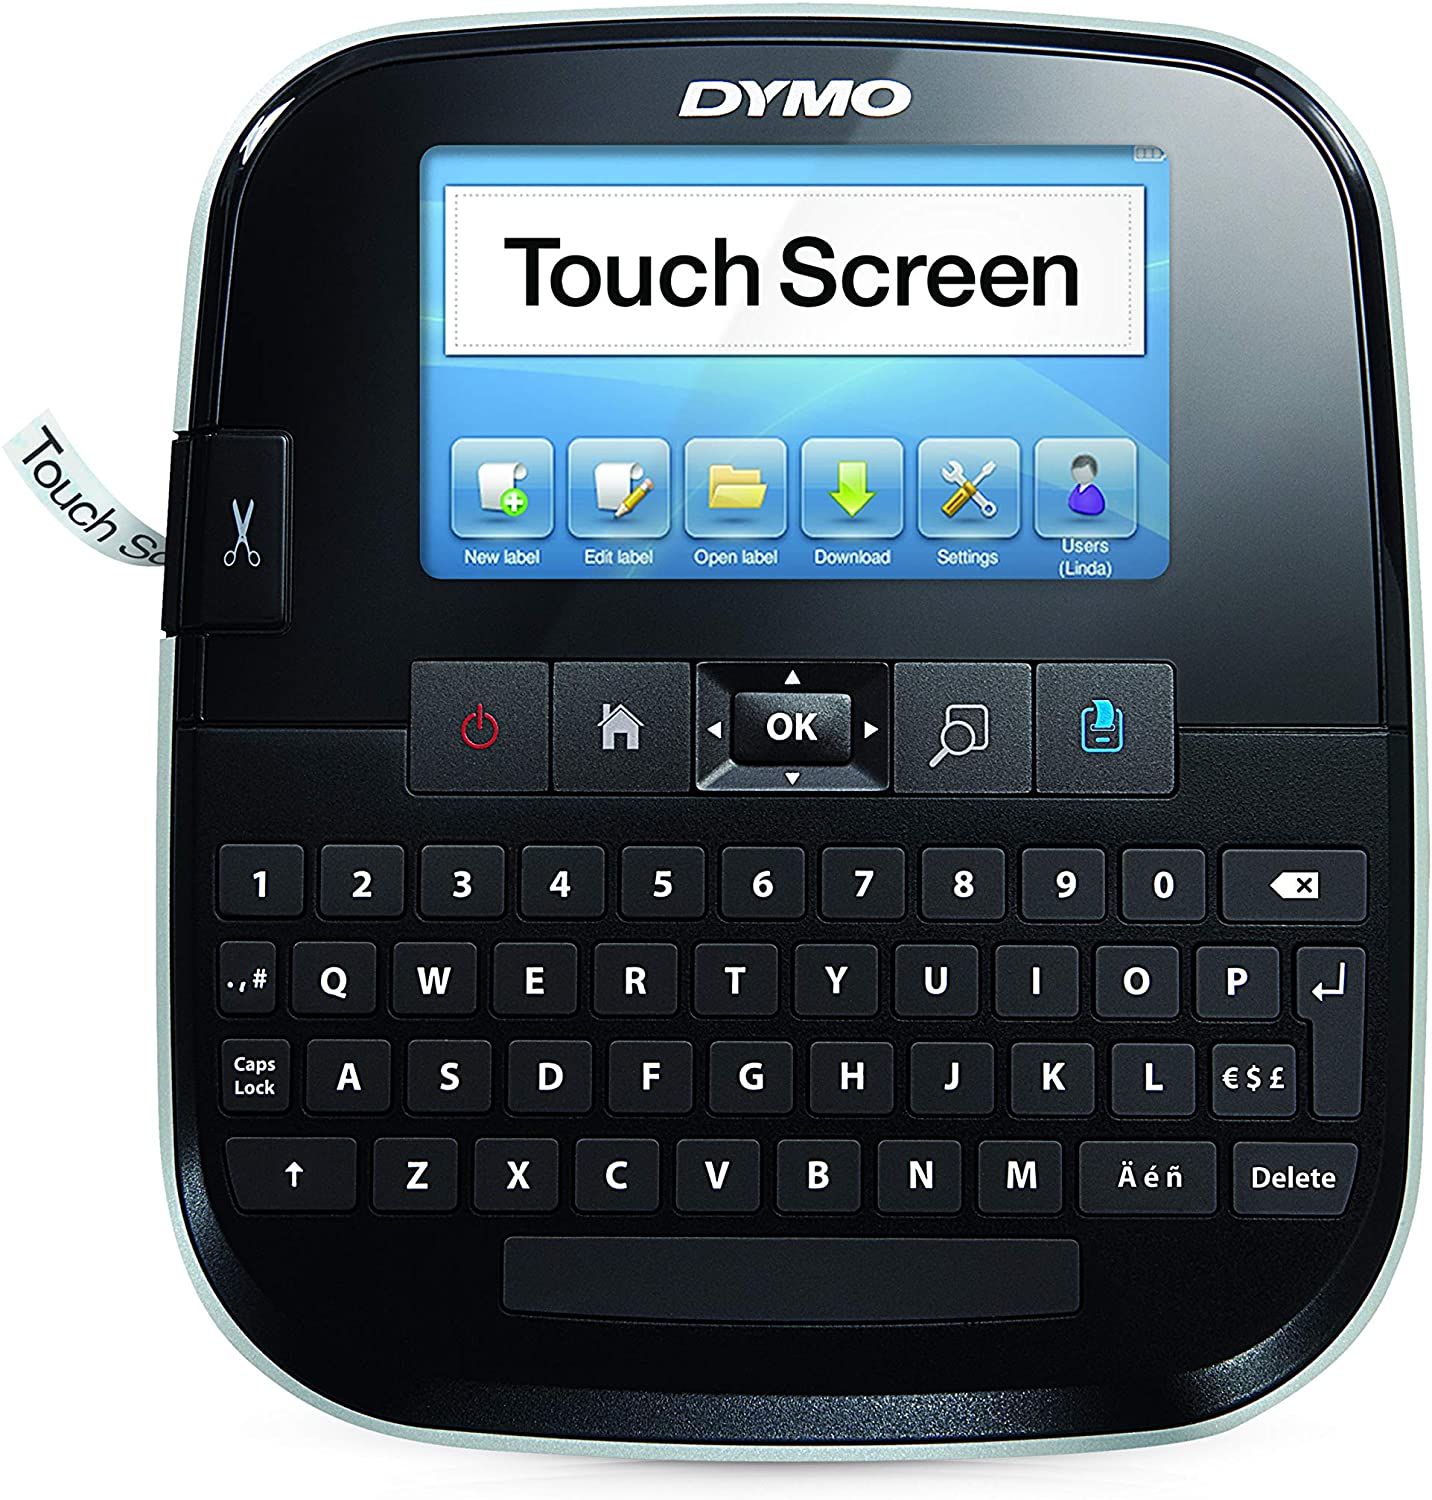 DYMO LabelManager 500TS touch screen